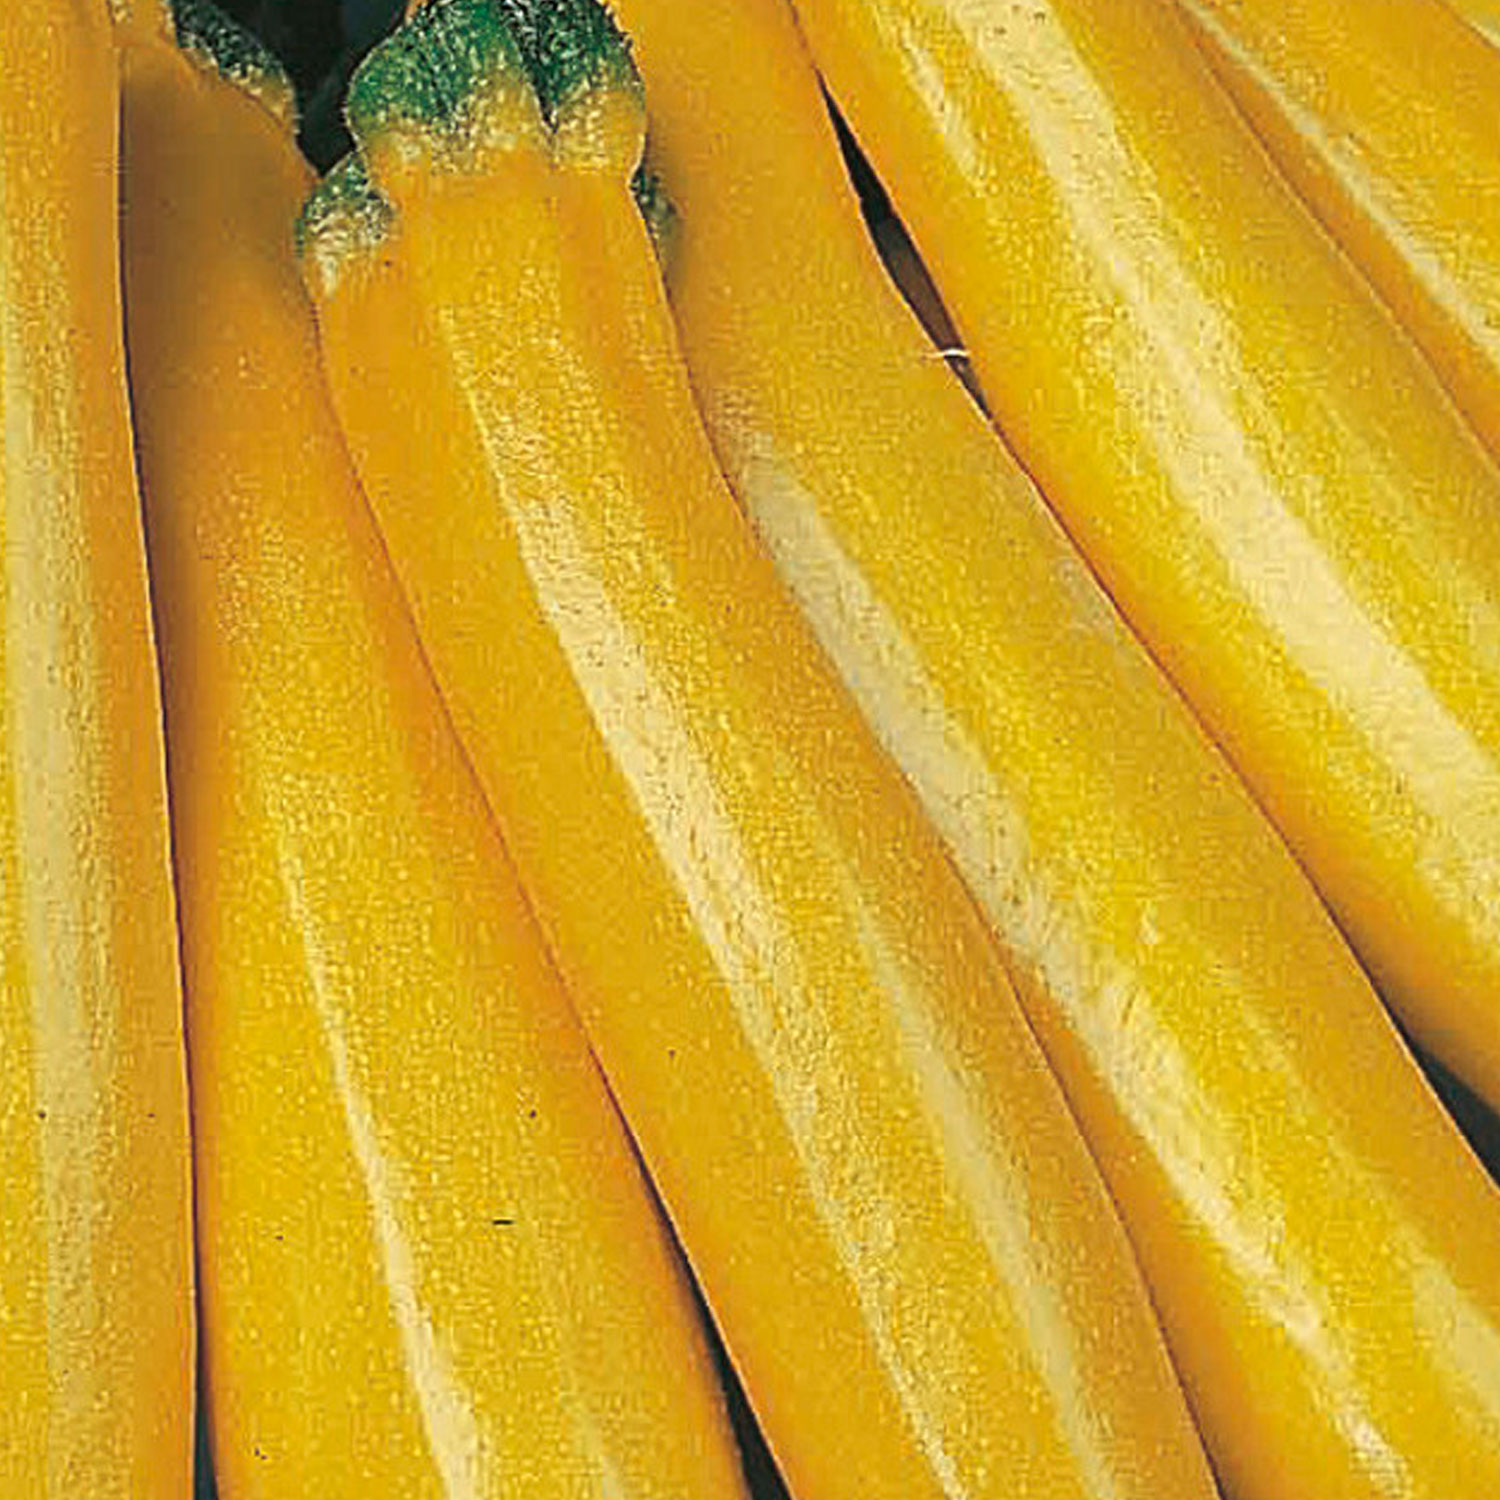 Johnsons Gold Rush F1 Courgette Seeds Image 1